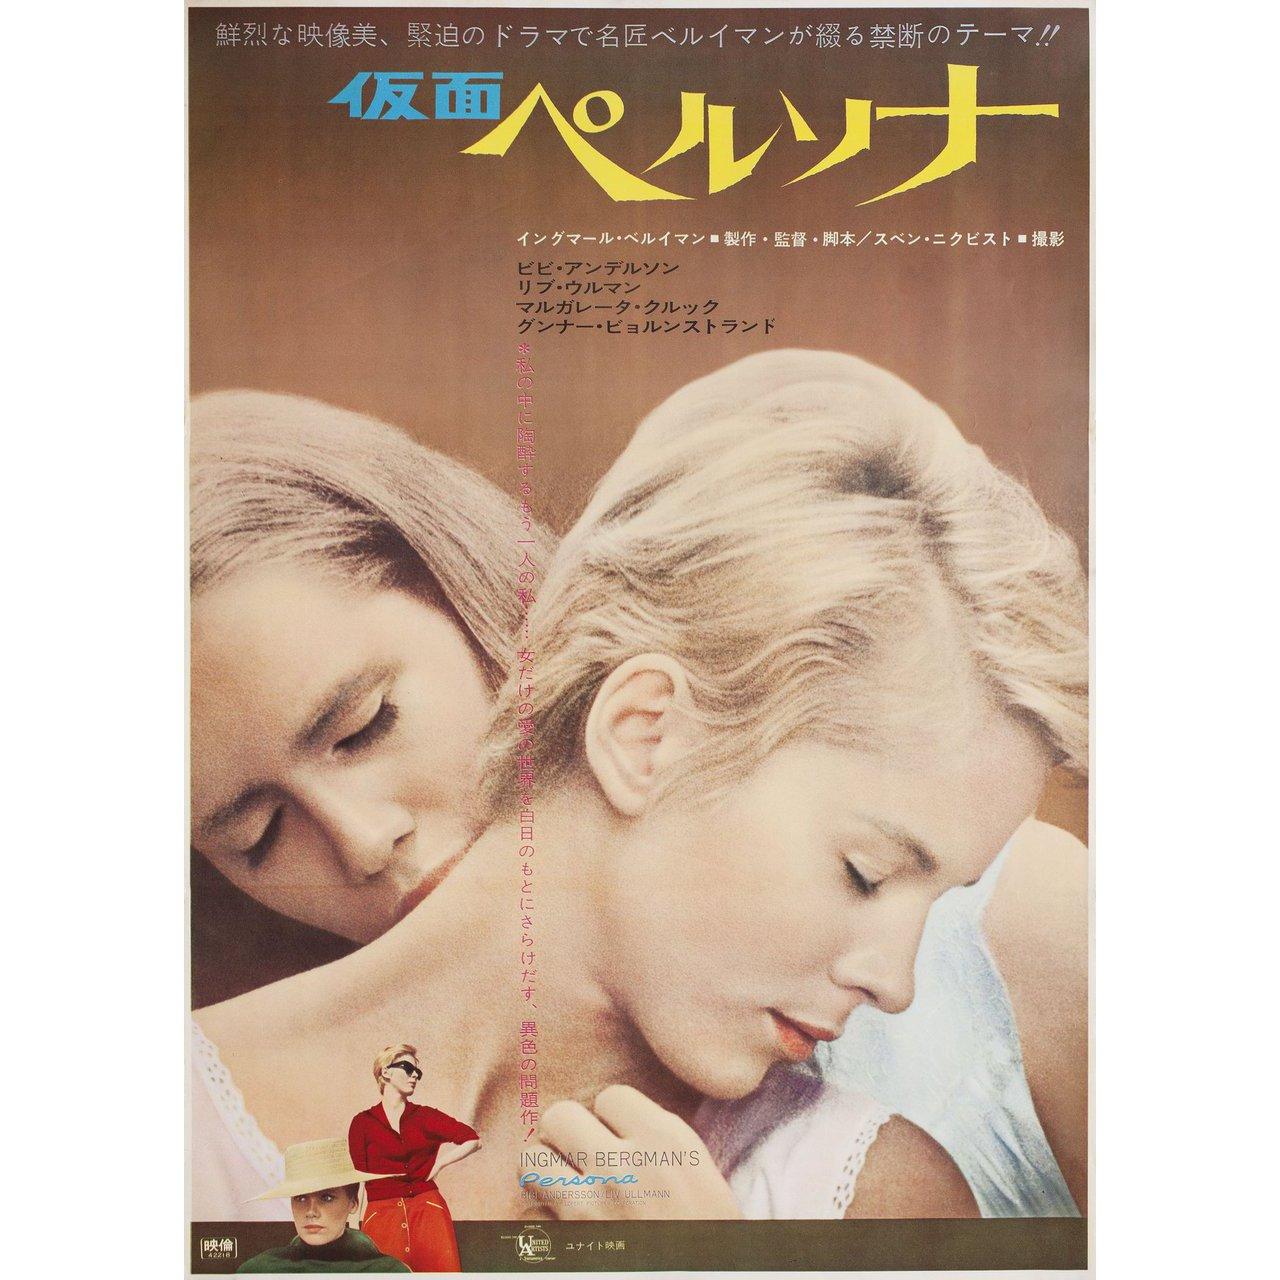 Original 1967 Japanese B2 poster for the film Persona directed by Ingmar Bergman with Bibi Andersson / Liv Ullmann / Margaretha Krook / Gunnar Bjornstrand. Very Good-Fine condition, rolled. Please note: the size is stated in inches and the actual